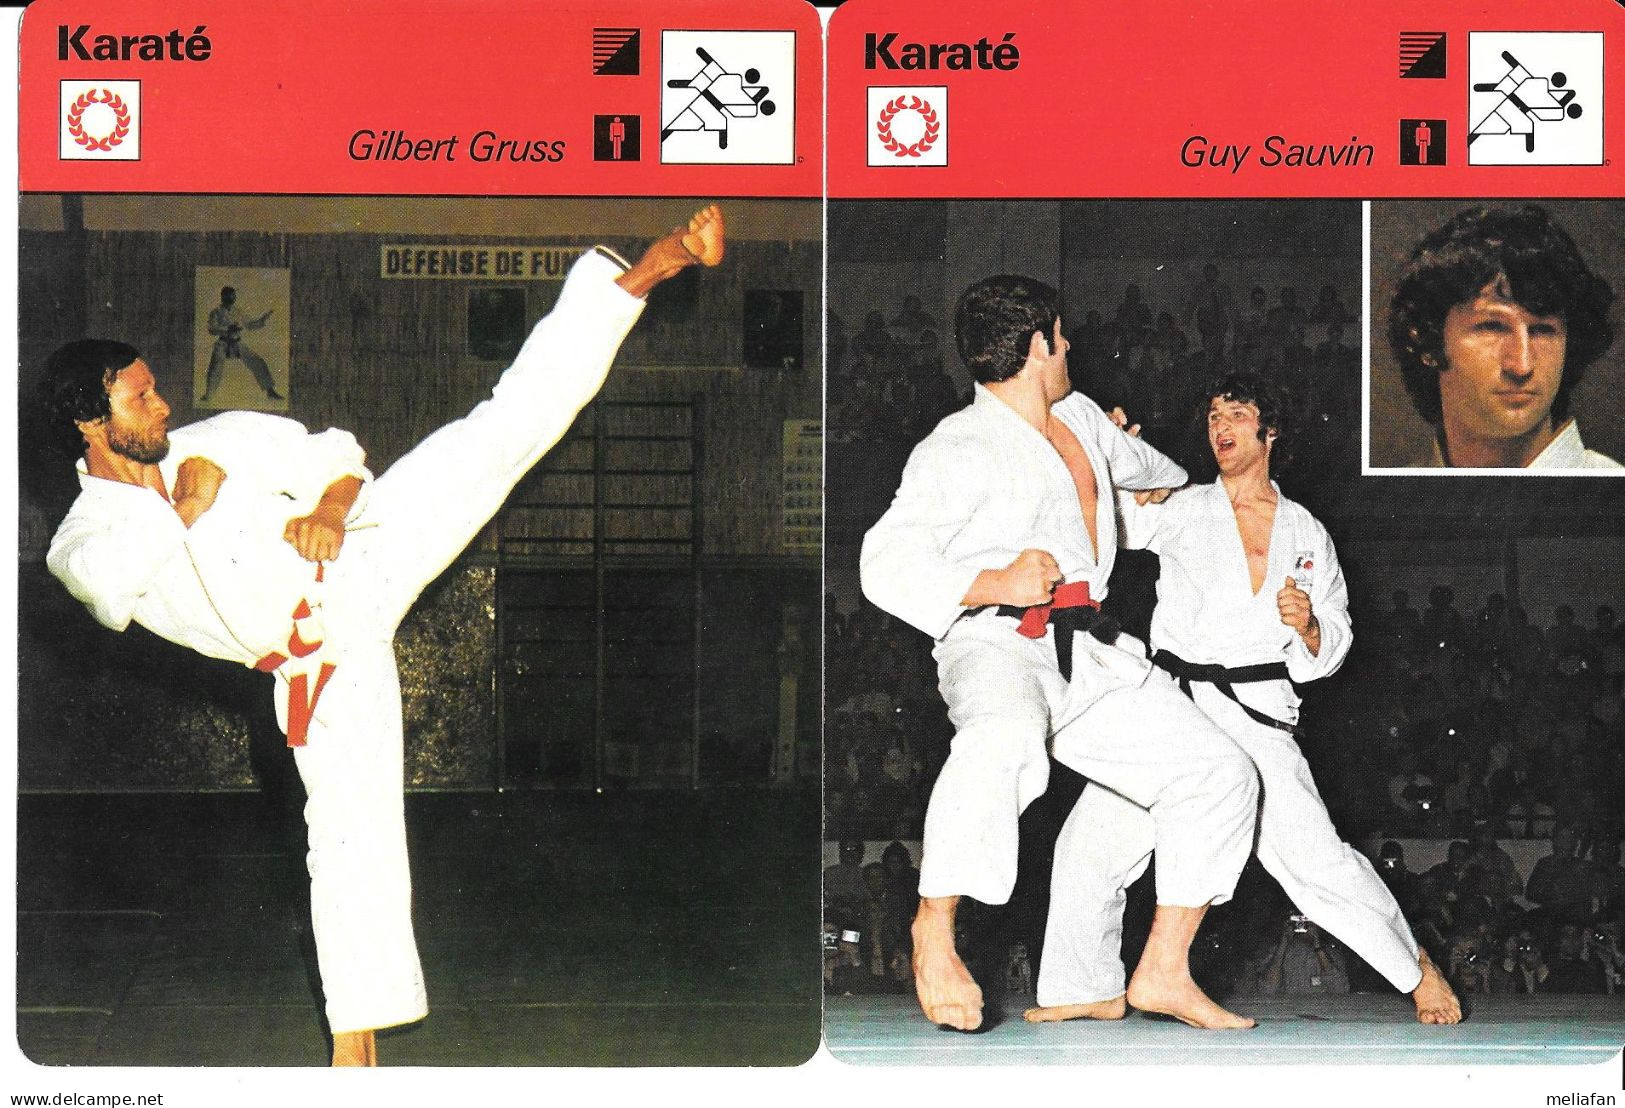 GF1785 - FICHES EDITION RENCONTRE - KARATE - GILBERT GRUSS - GUY SAUVIN - ROGER PASCHY - JEAN LUC MAMI - Martial Arts